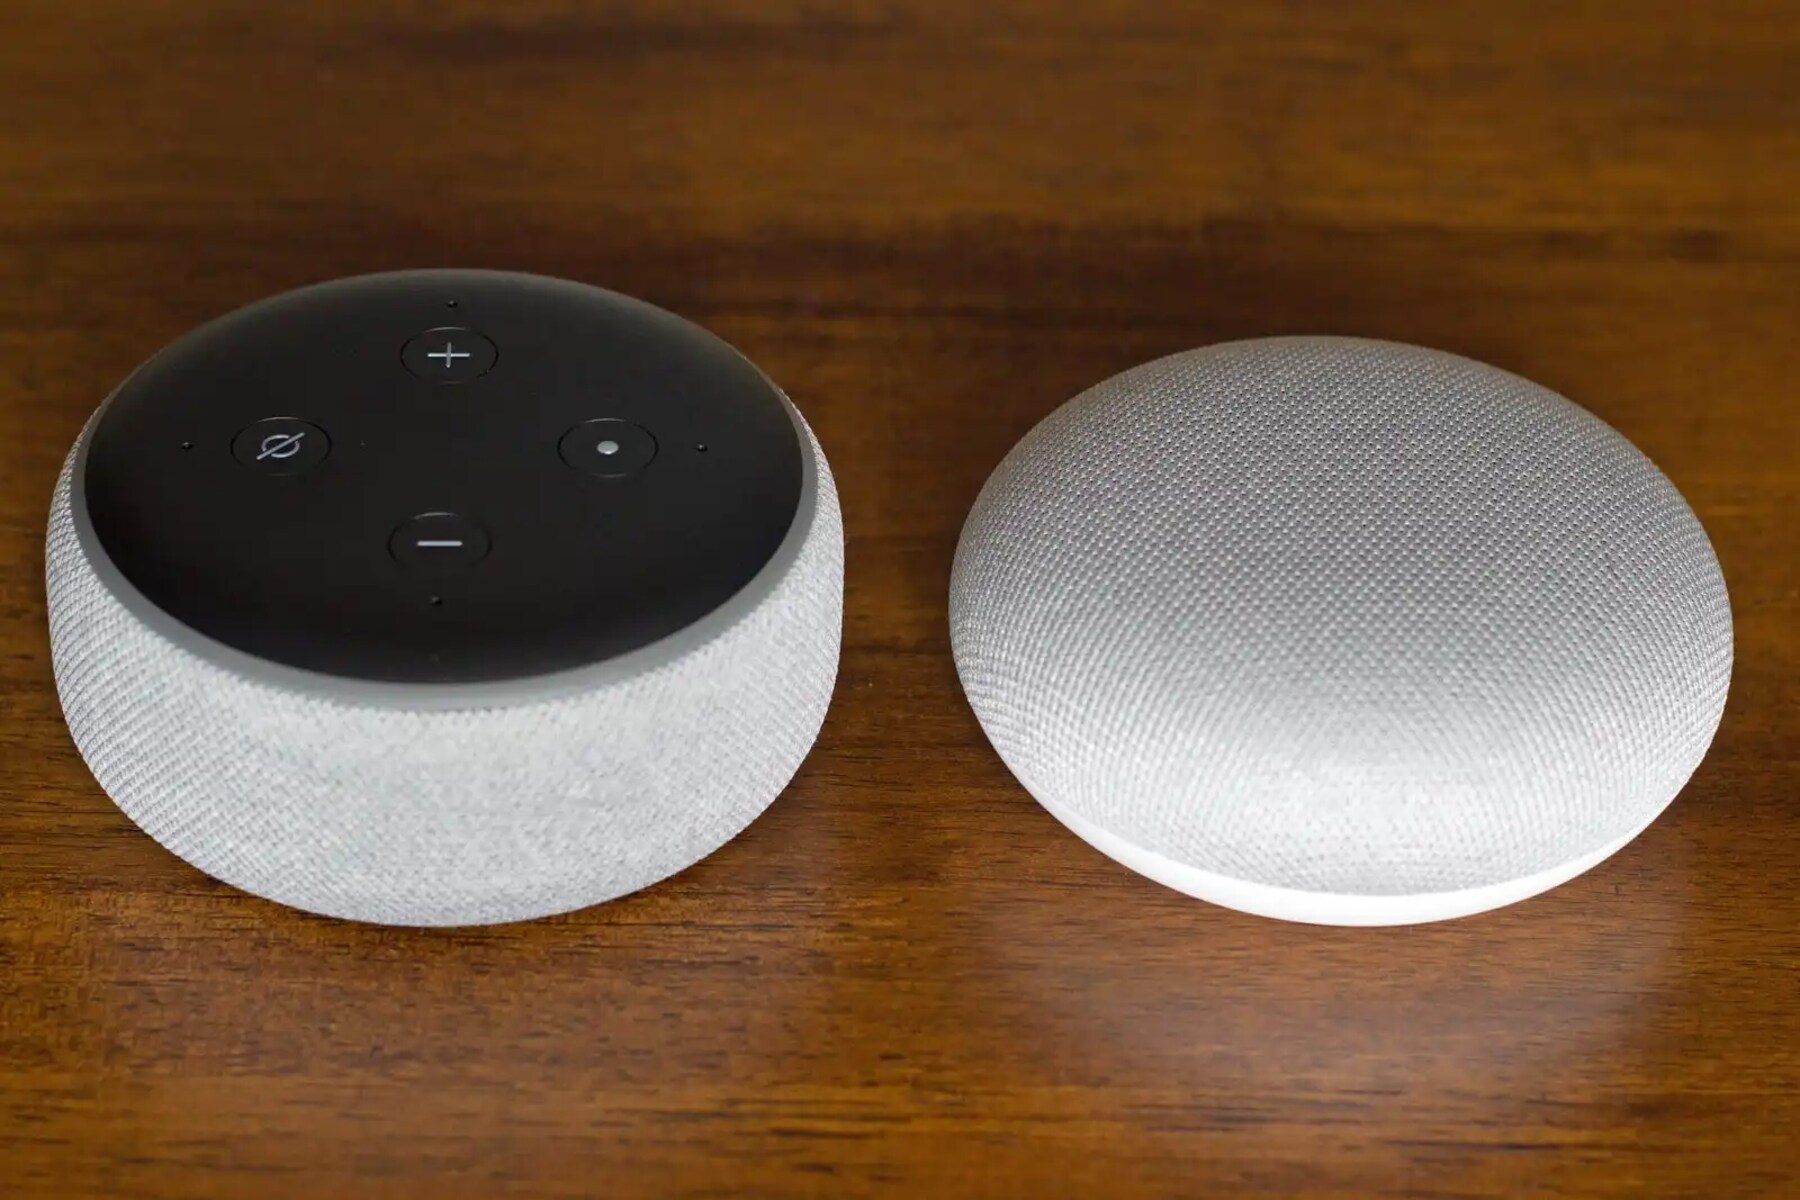 What Is The Difference Between The Google Mini And The Google Smart Speaker